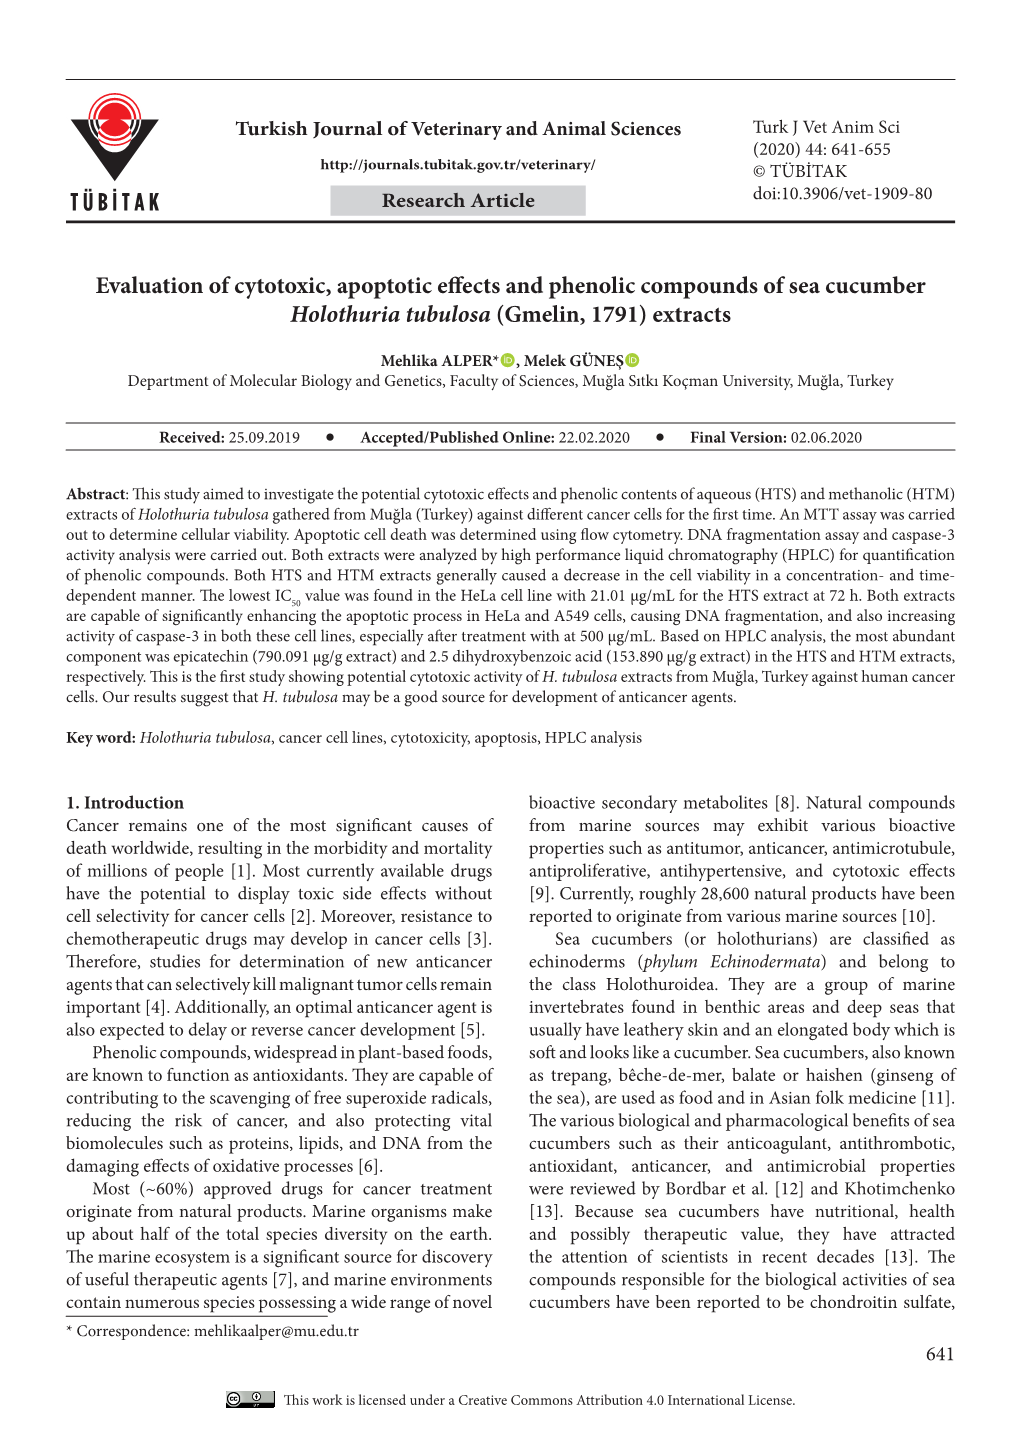 Evaluation of Cytotoxic, Apoptotic Effects and Phenolic Compounds of Sea Cucumber Holothuria Tubulosa (Gmelin, 1791) Extracts